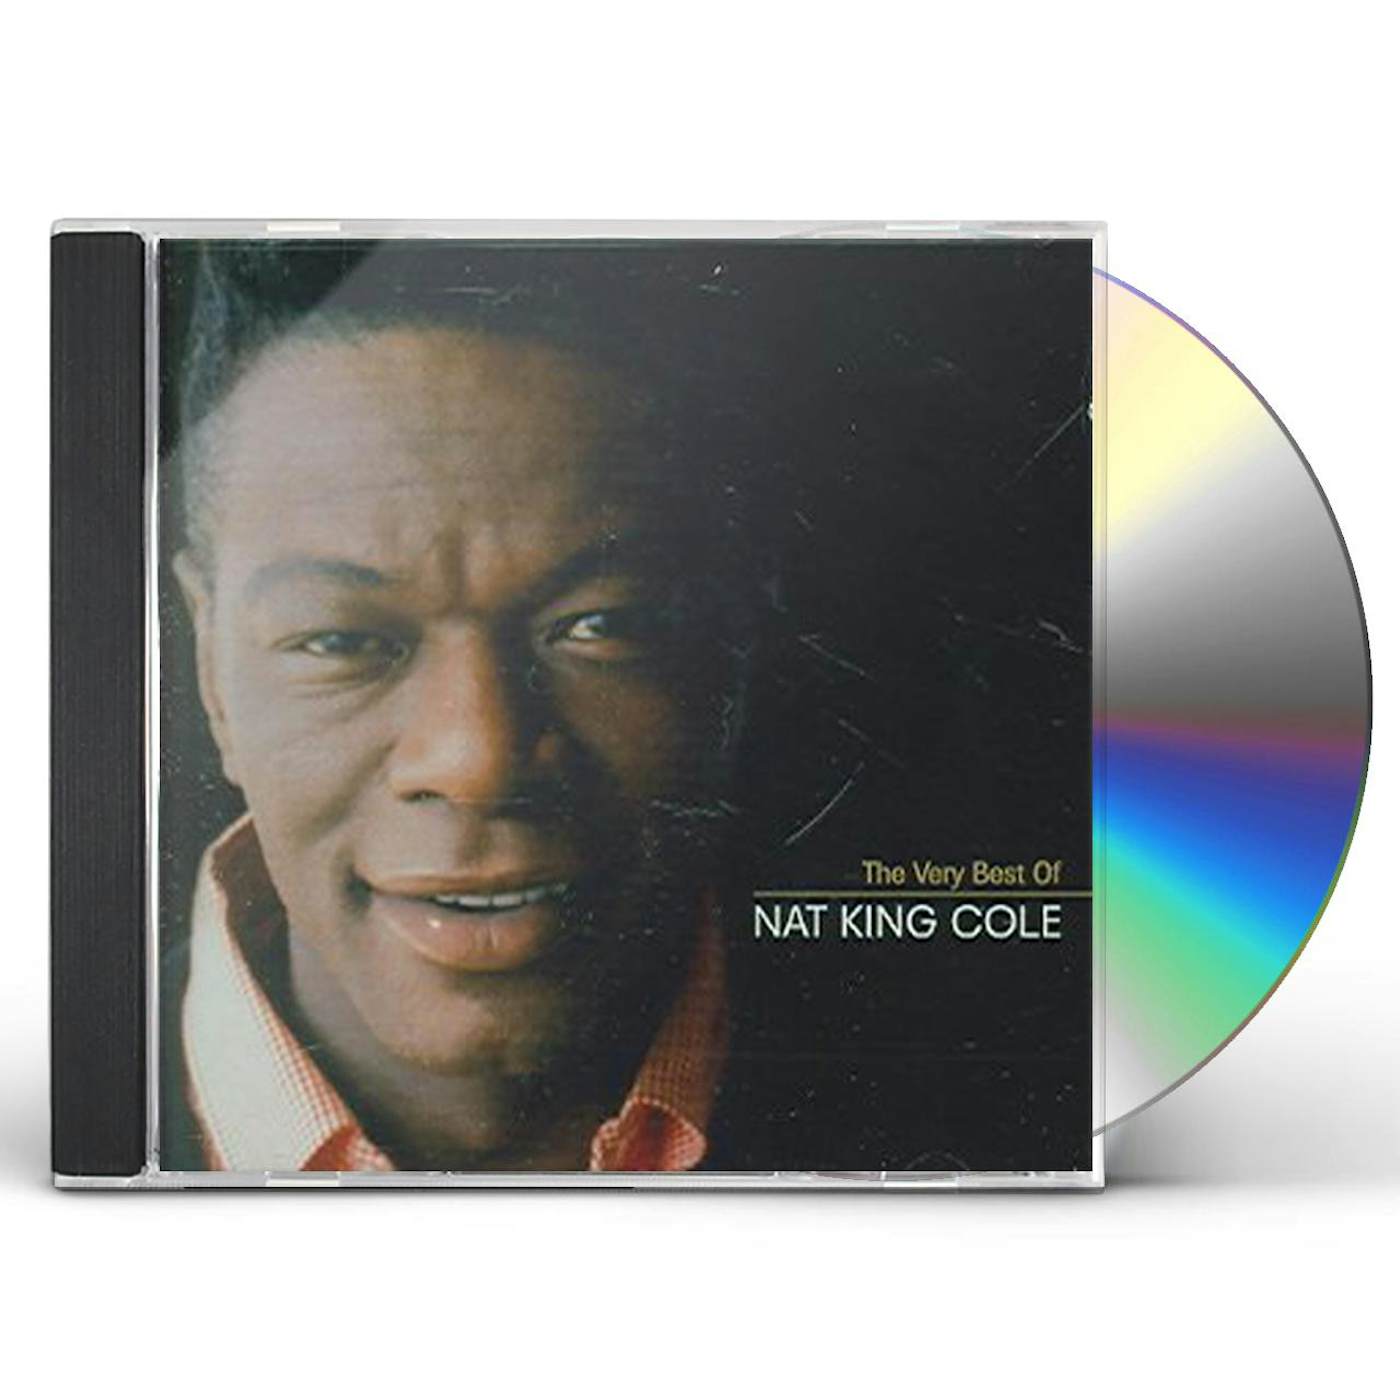 VERY BEST OF NAT KING COLE CD